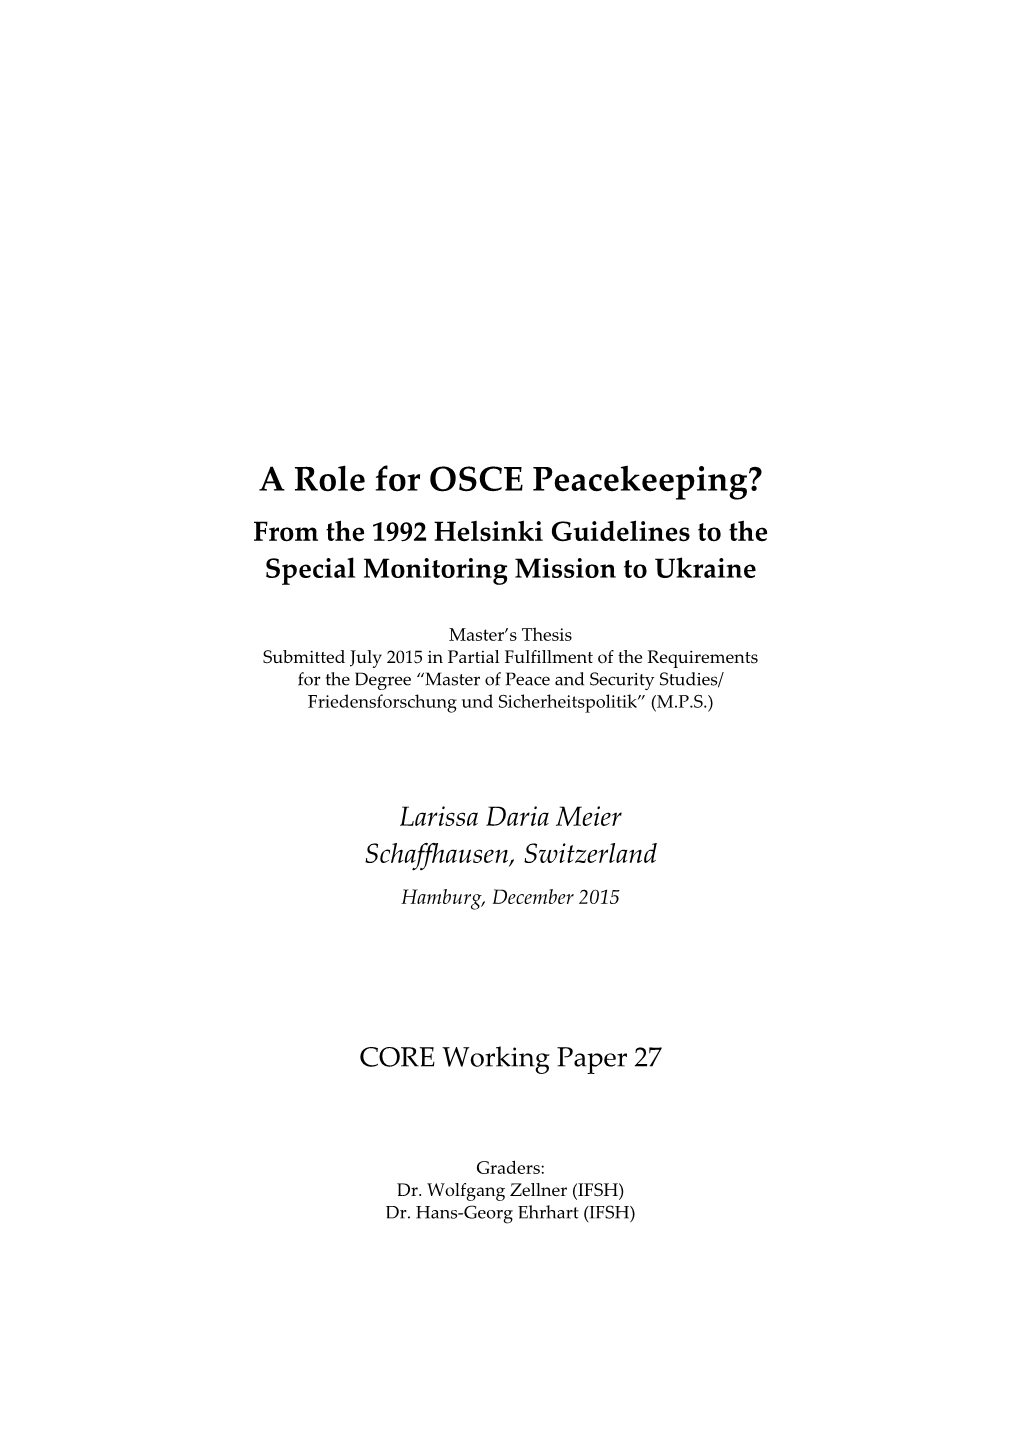 CORE Working Paper 27: a Role for OSCE Peacekeeping?